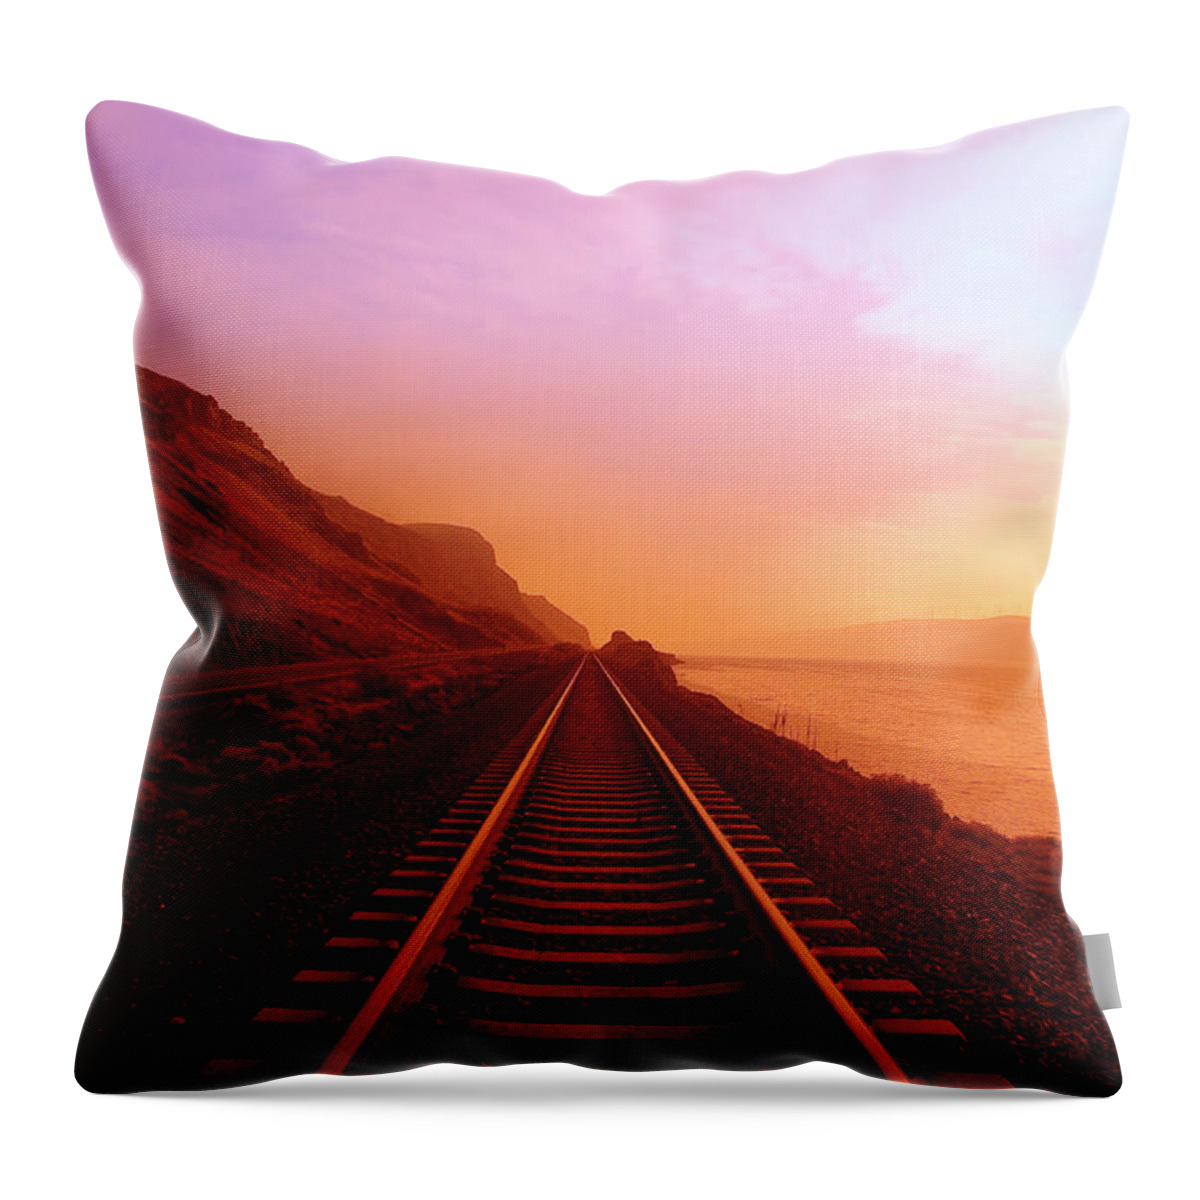 #faatoppicks Throw Pillow featuring the photograph The Long Walk To No Where by Jeff Swan